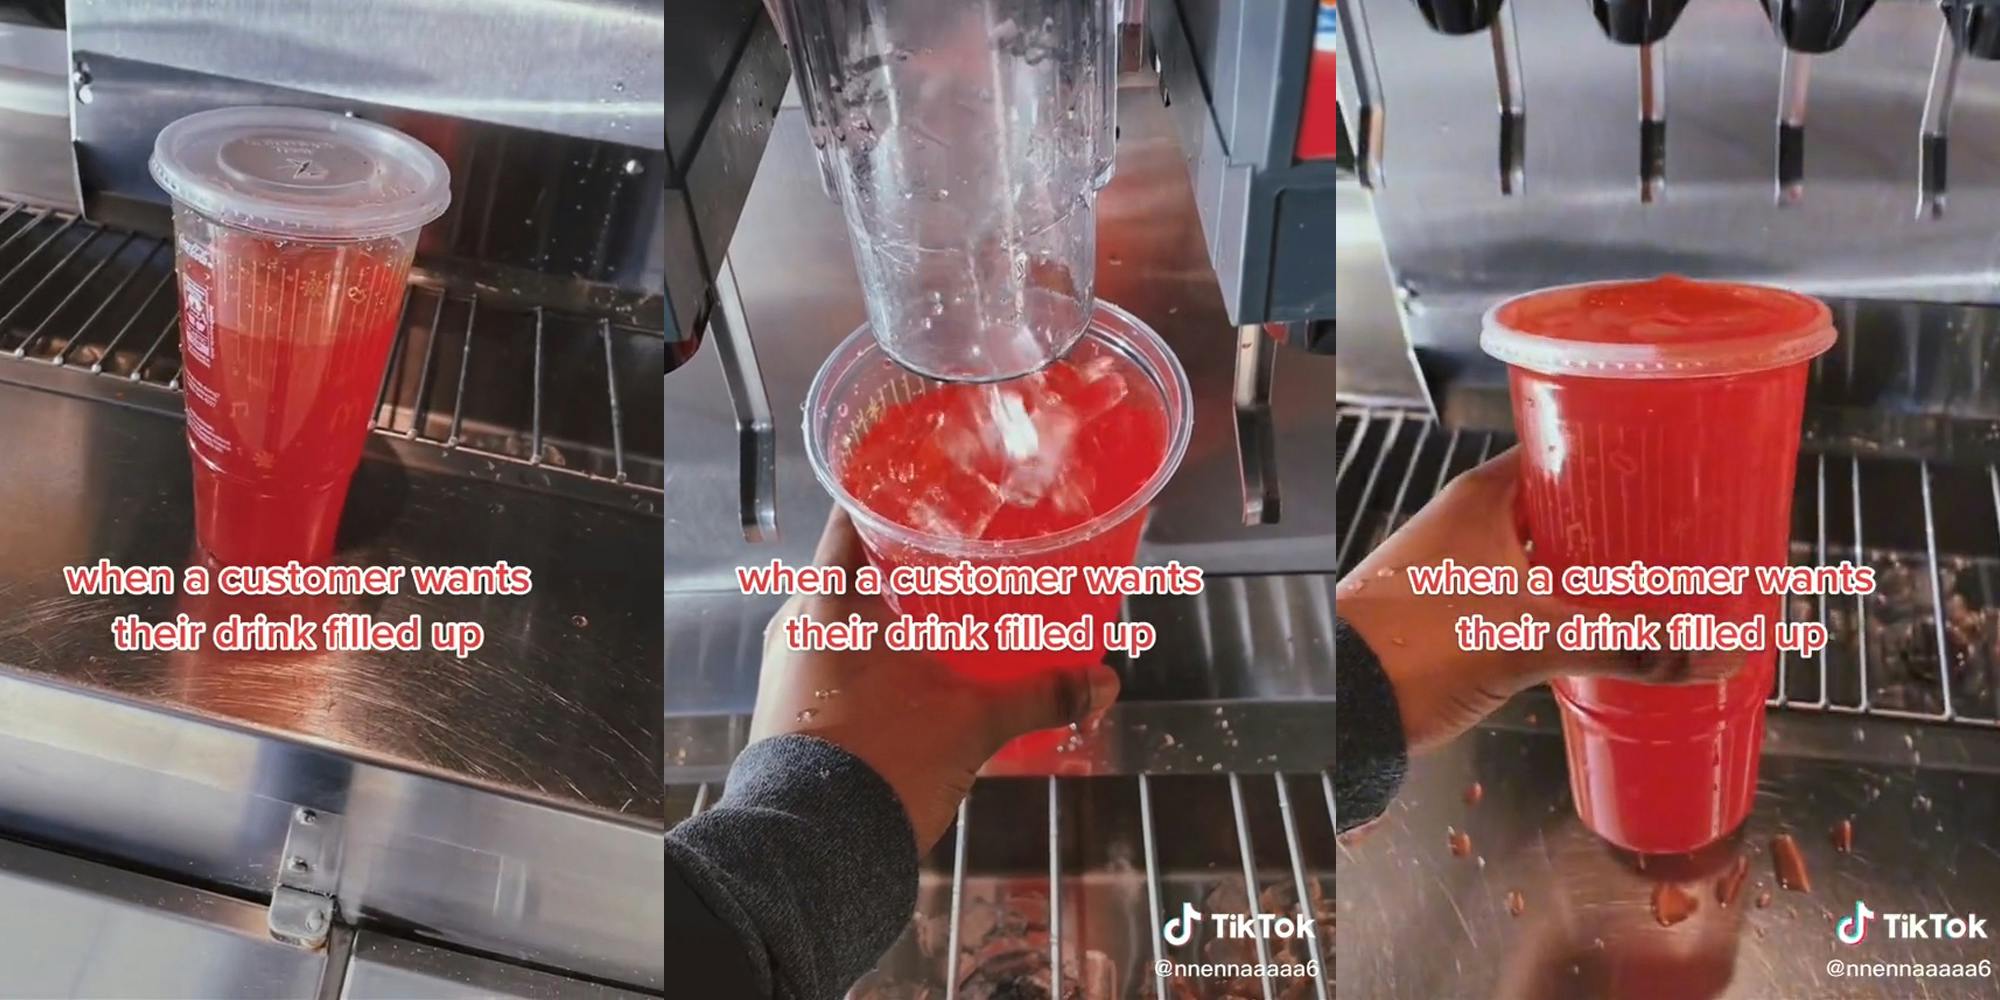 McDonald's Worker Shares What They Do to Fill Customers' Drinks